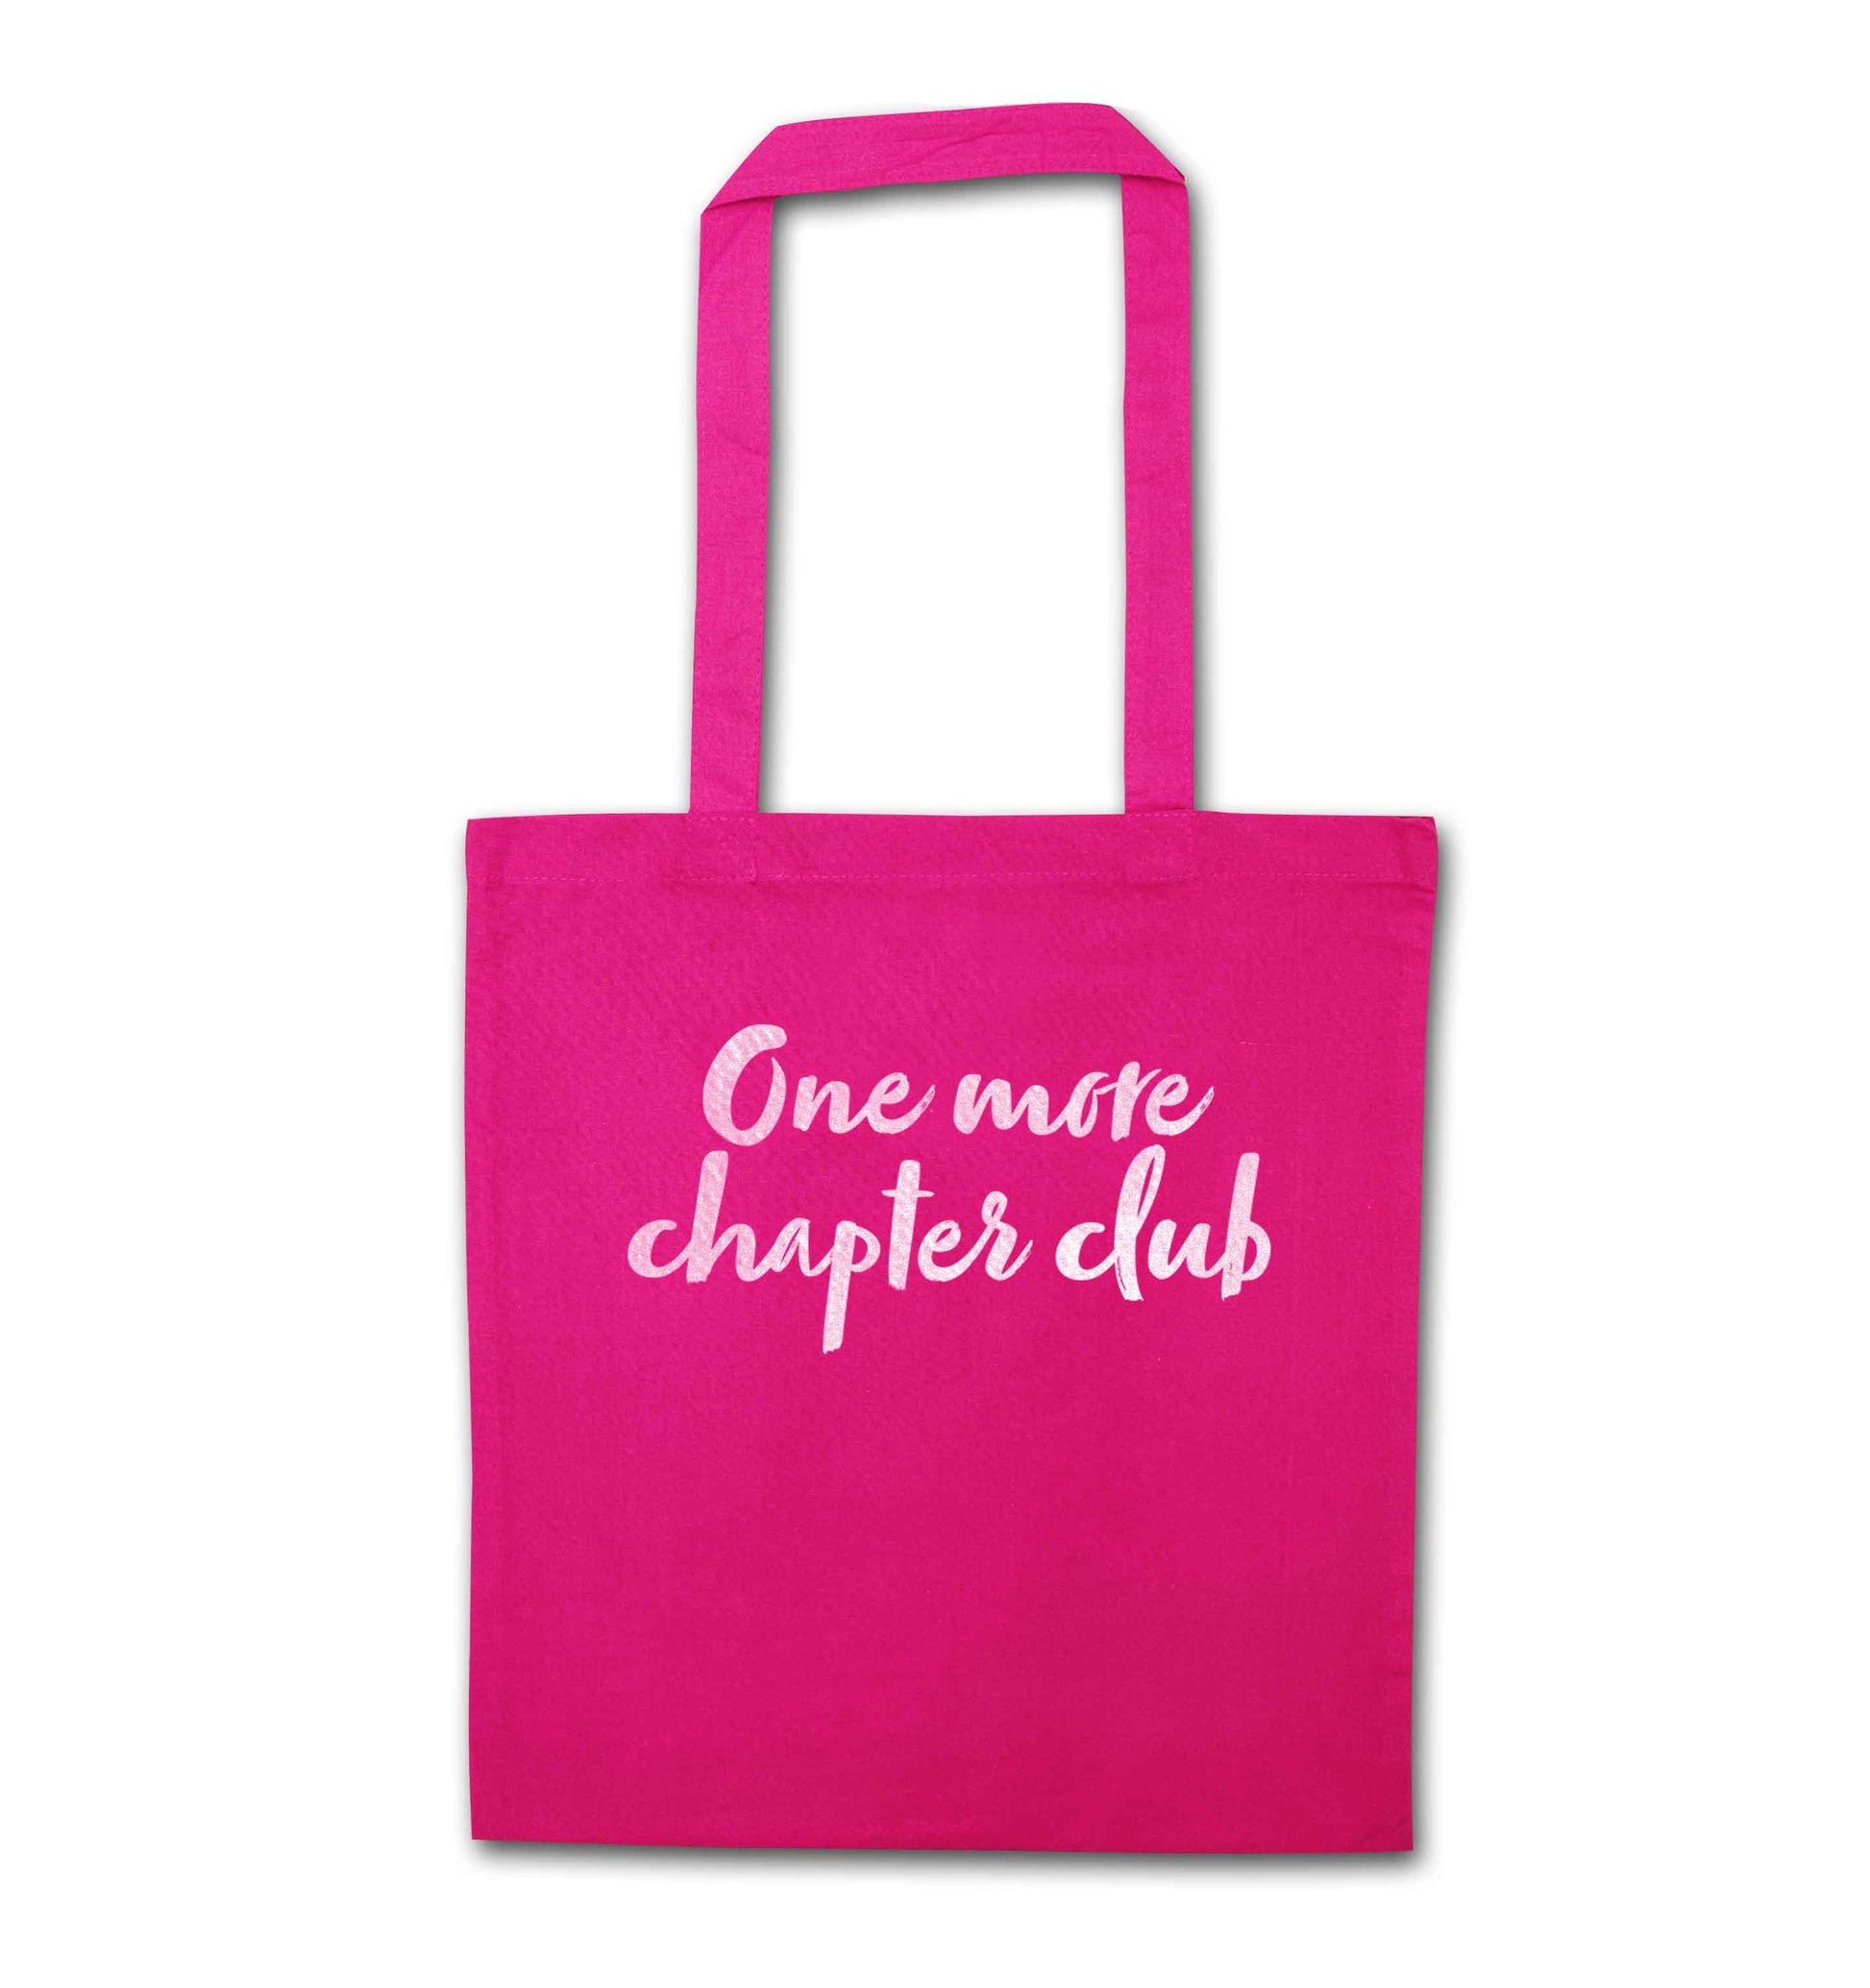 One more chapter club Kit pink tote bag